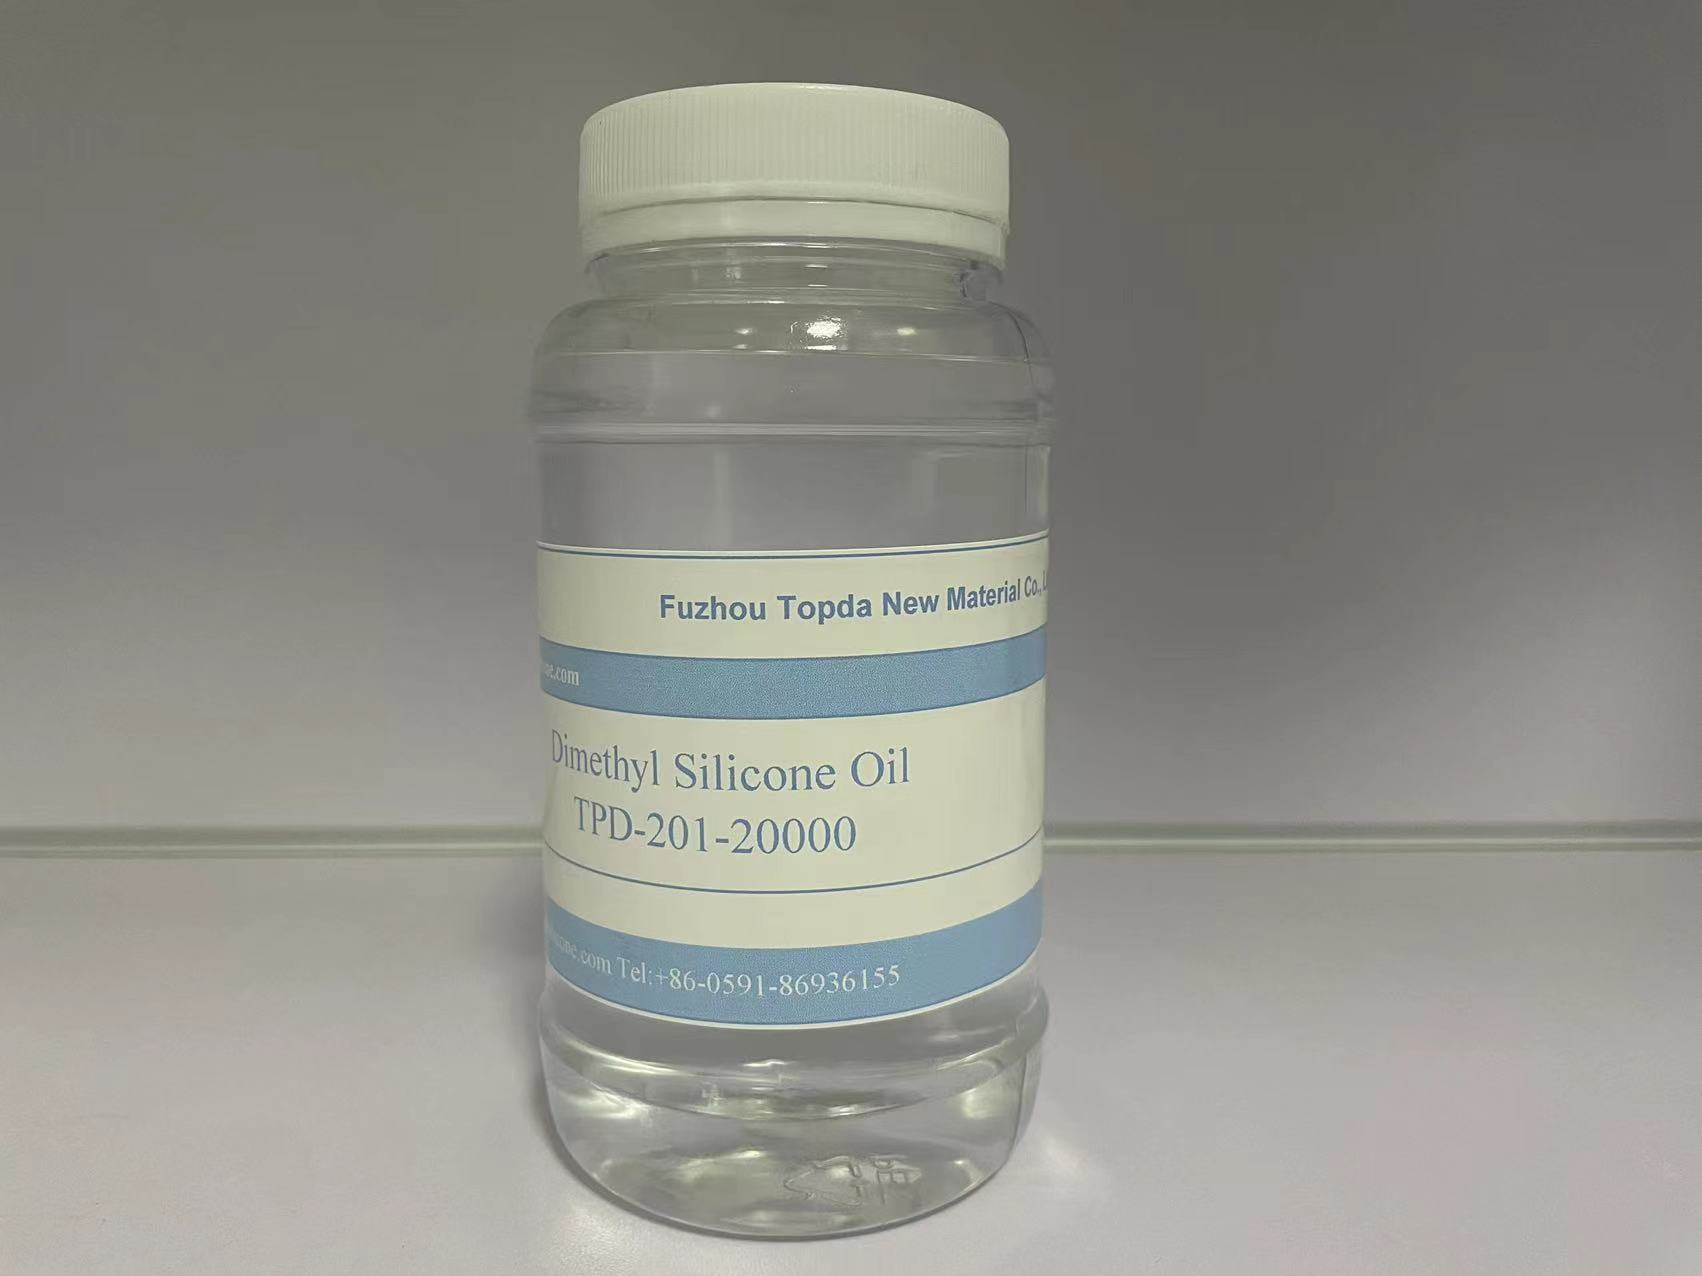 Silicone Oil 100000cSt TPD-201-100000